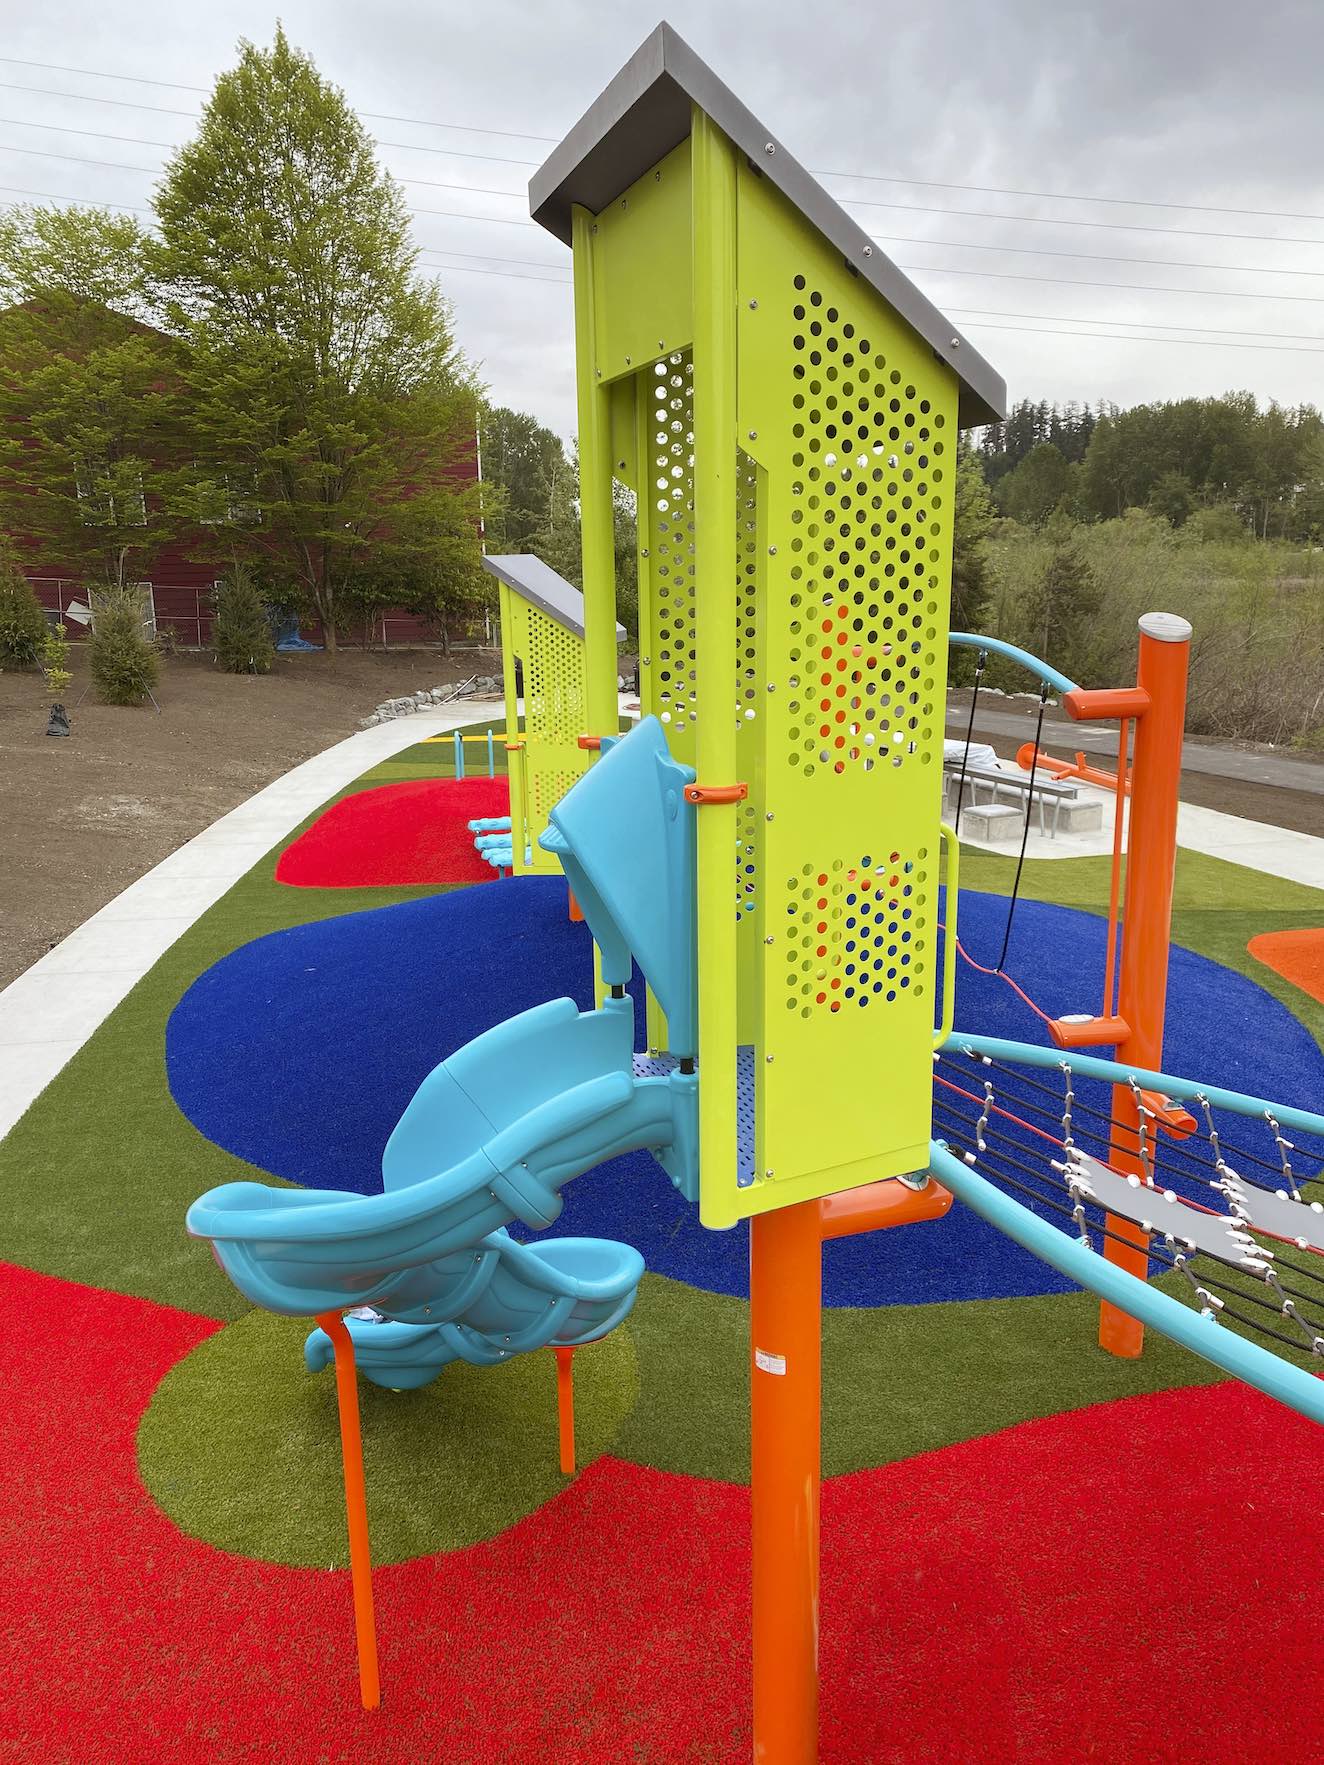 Brightly colored playground equipment on vibrantly hued safety surfacing, featuring a blue slide, climbing structures, and greenery in the background.